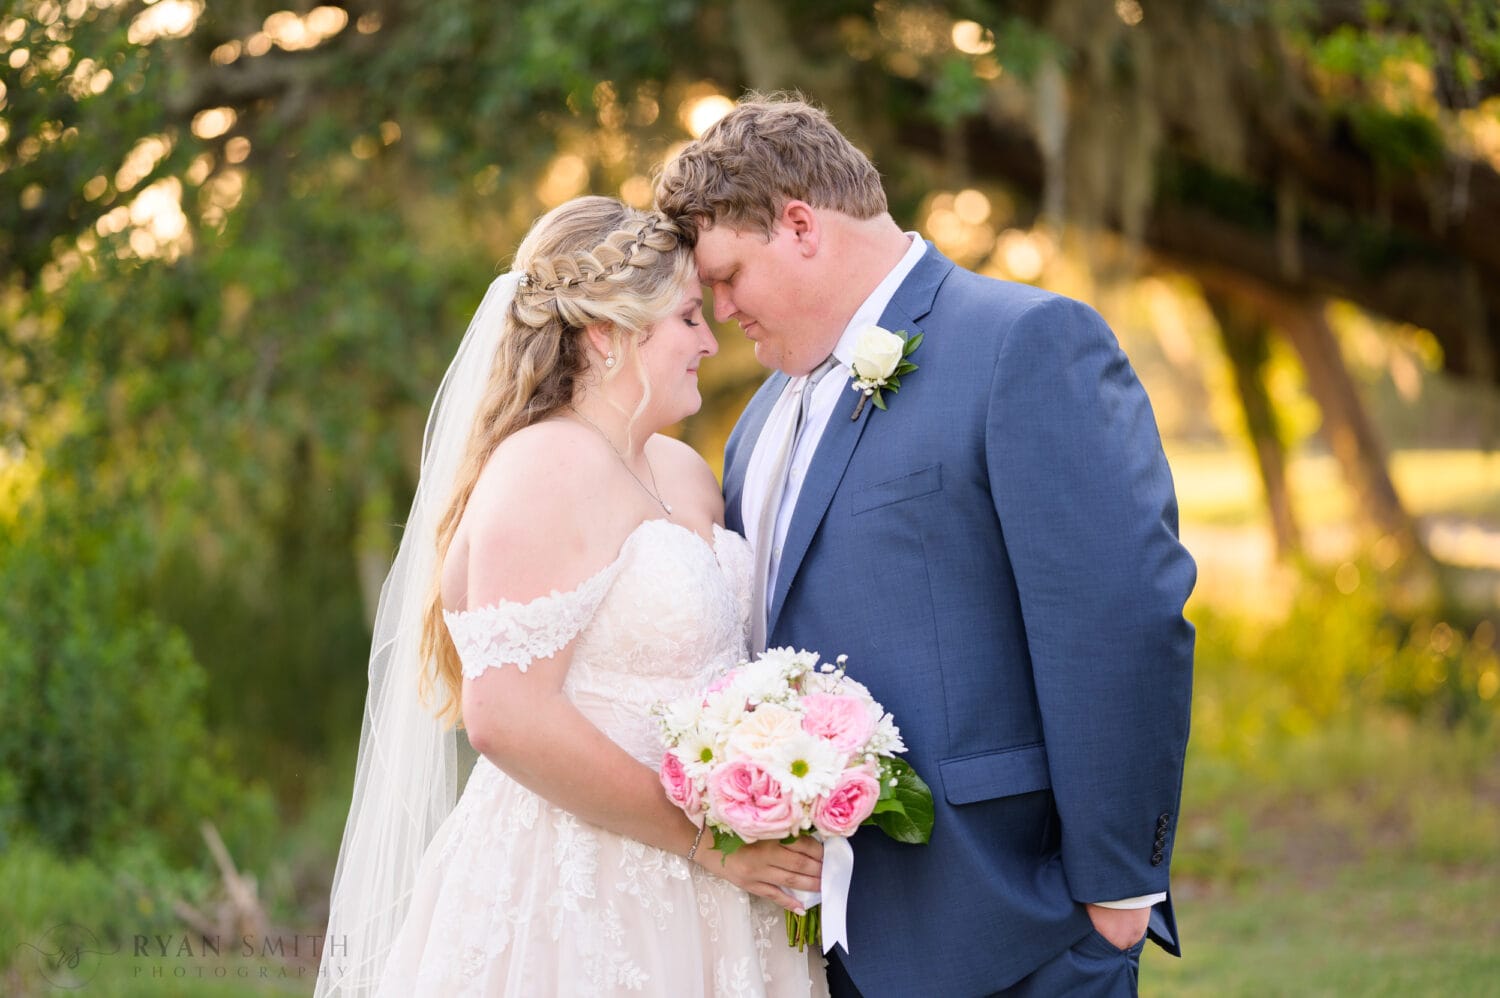 Touching foreheads backlit by the bokeh of the light filtering through the oaks - Pawleys Plantation